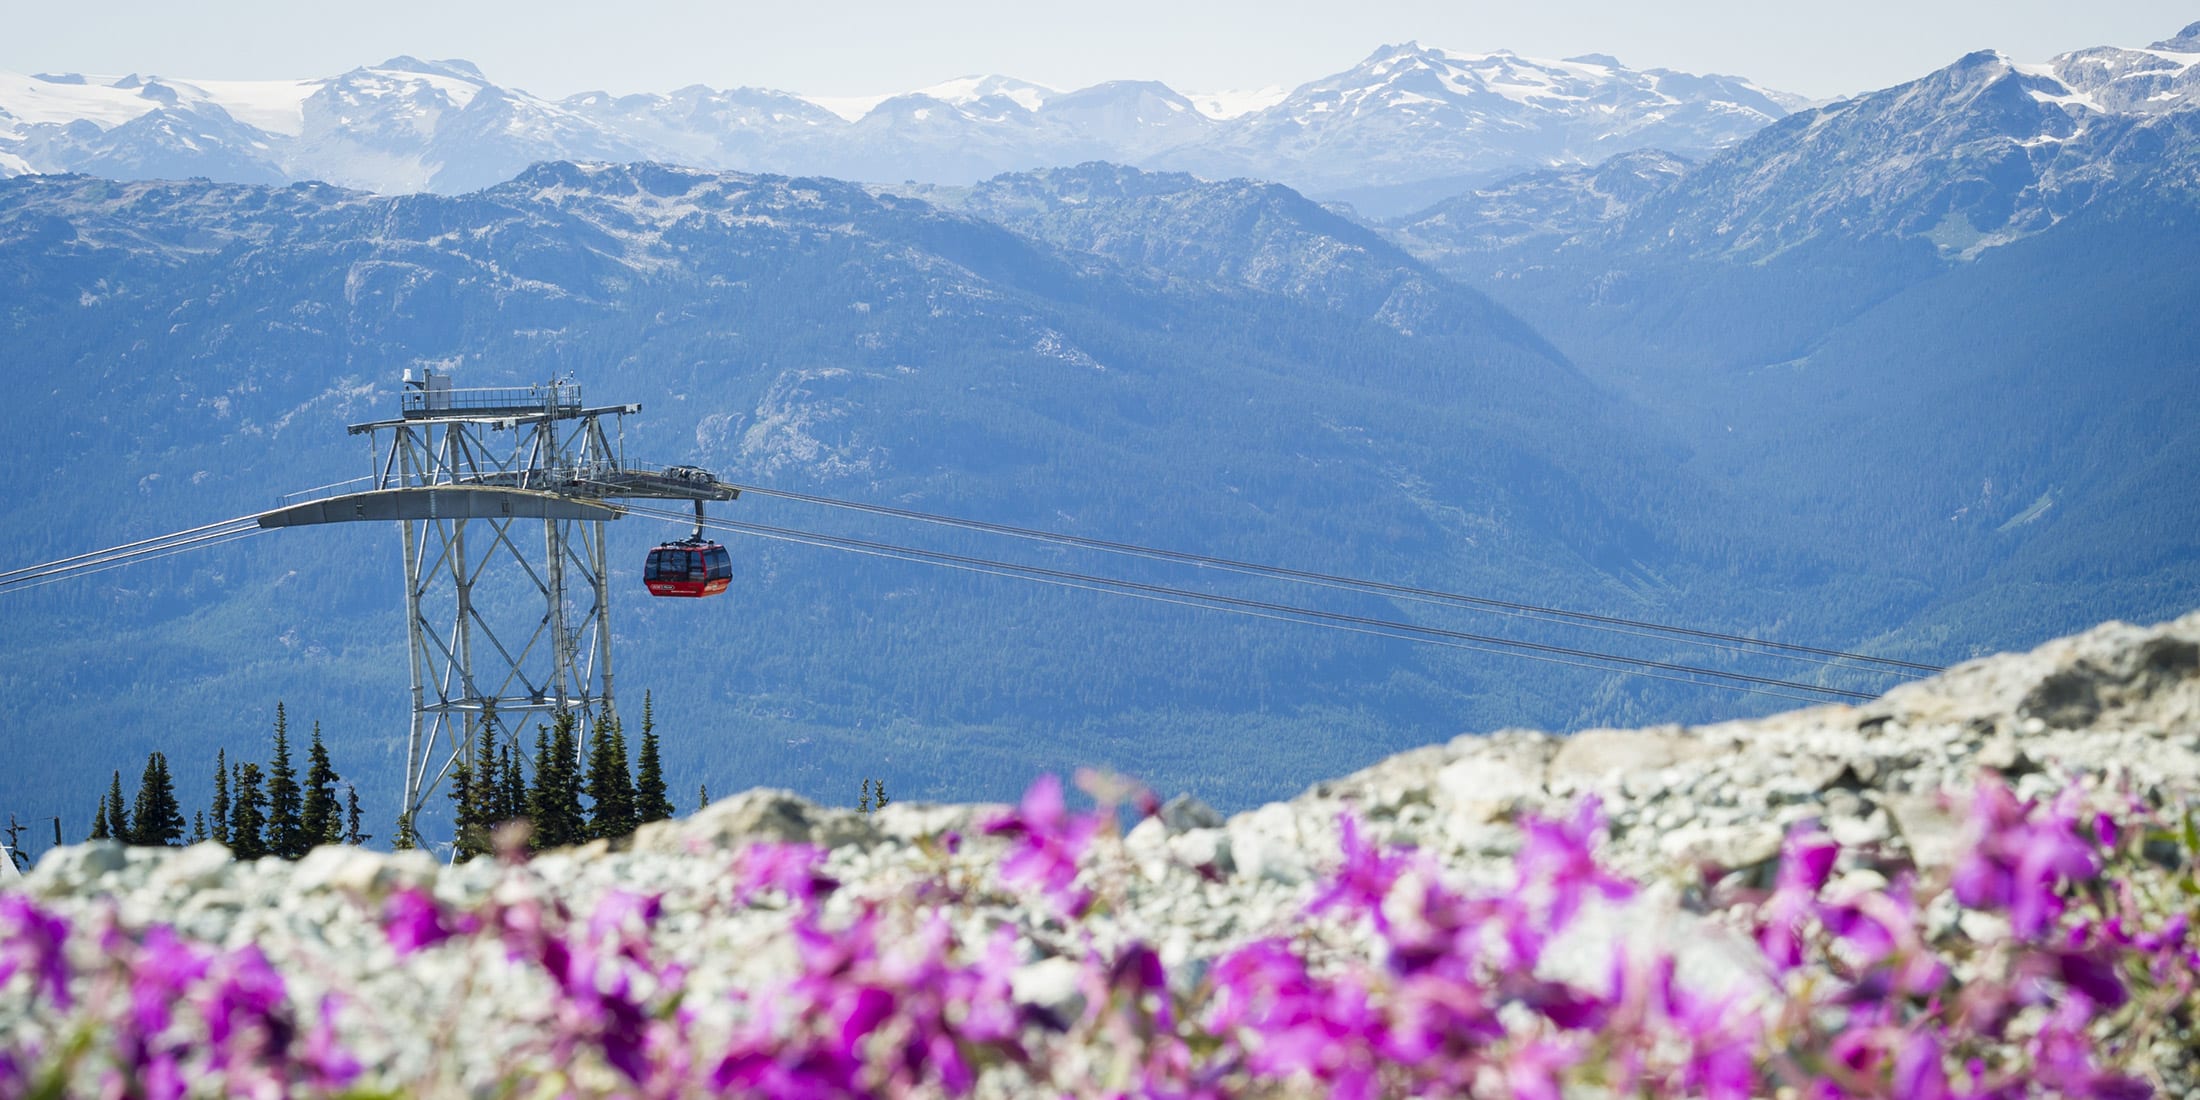 A great destination for a Whistler group getaway